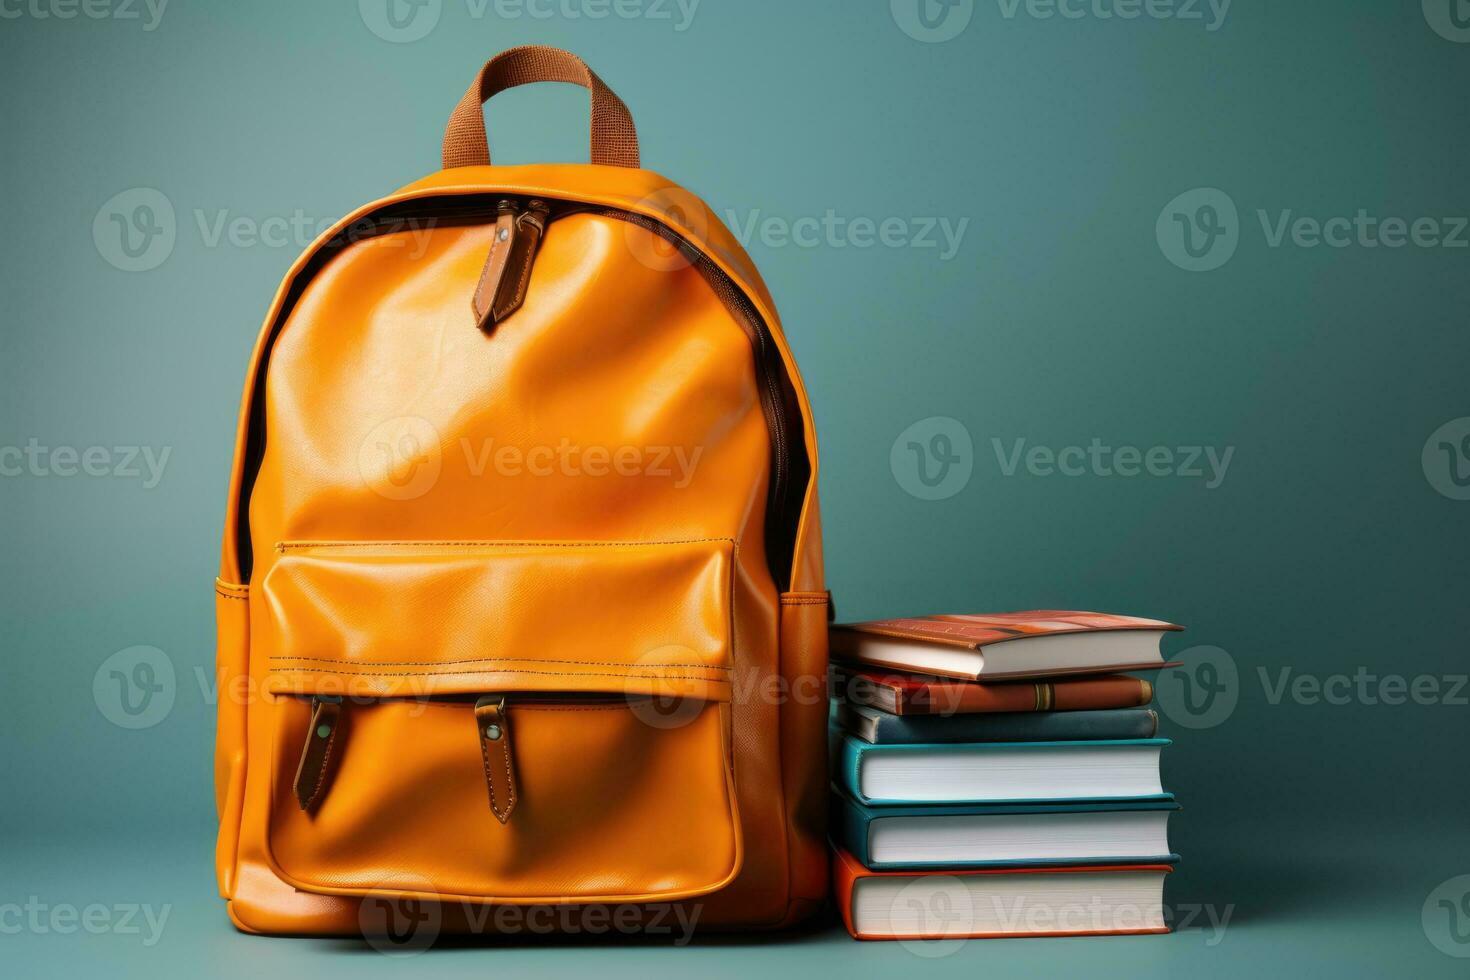 Books and backpack symbolizing education outreach isolated on a gradient background photo